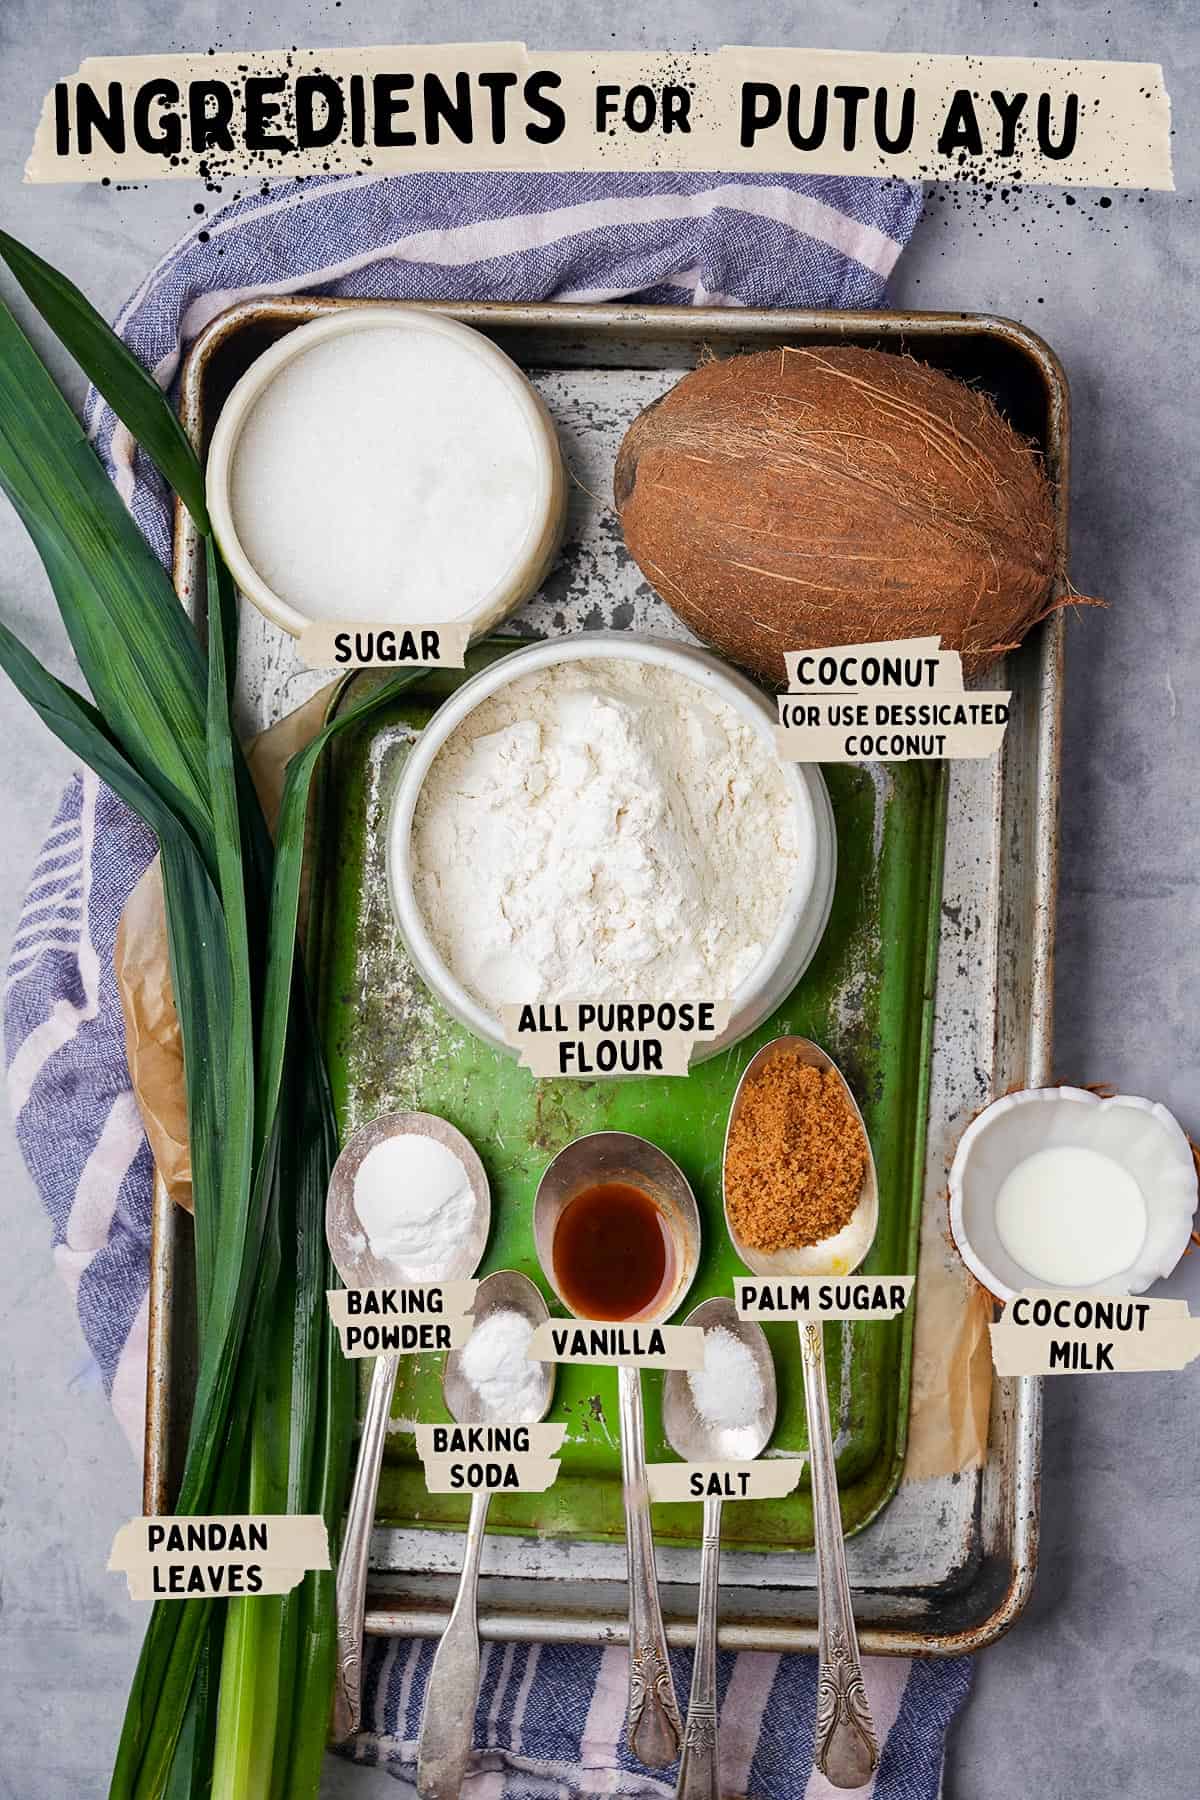 Ingredients for putu ayu on a tray.